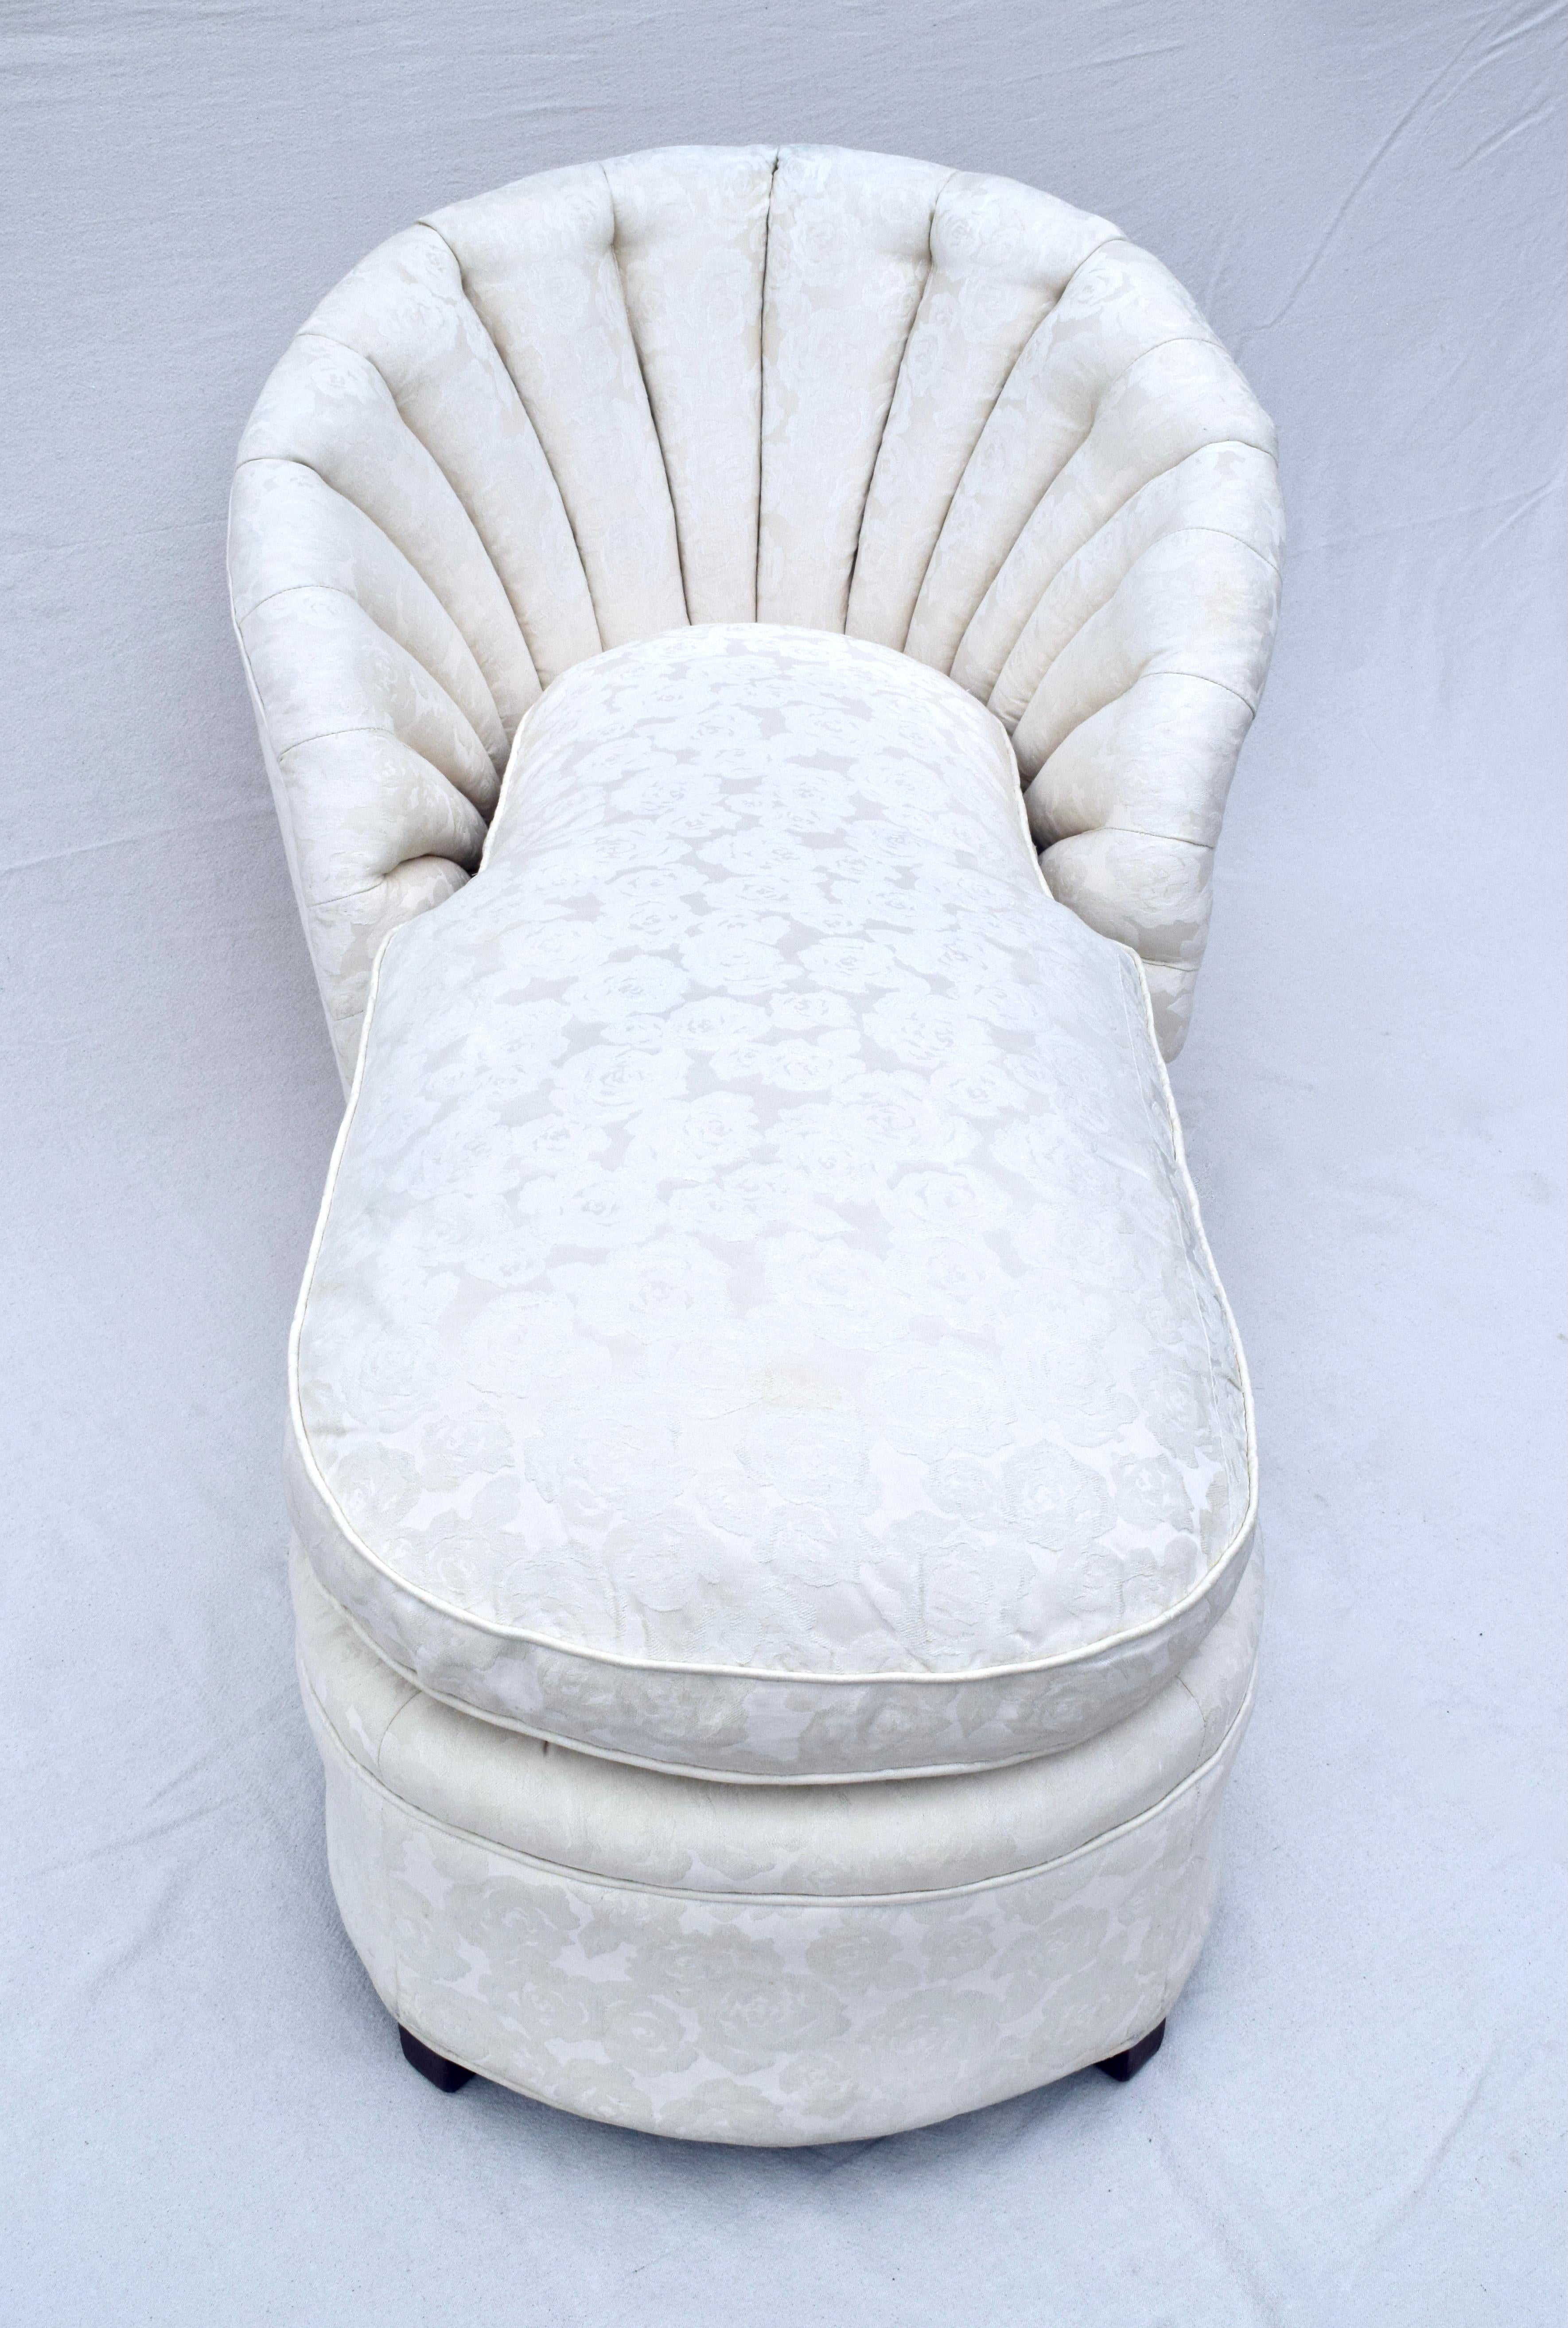 A custom sculpted & scalloped channel back clamshell form chaise lounge of exceptional high quality with single plush goose down feather cushion. Original floral Damask upholstery is in beautifully maintained condition showing very minor signs of